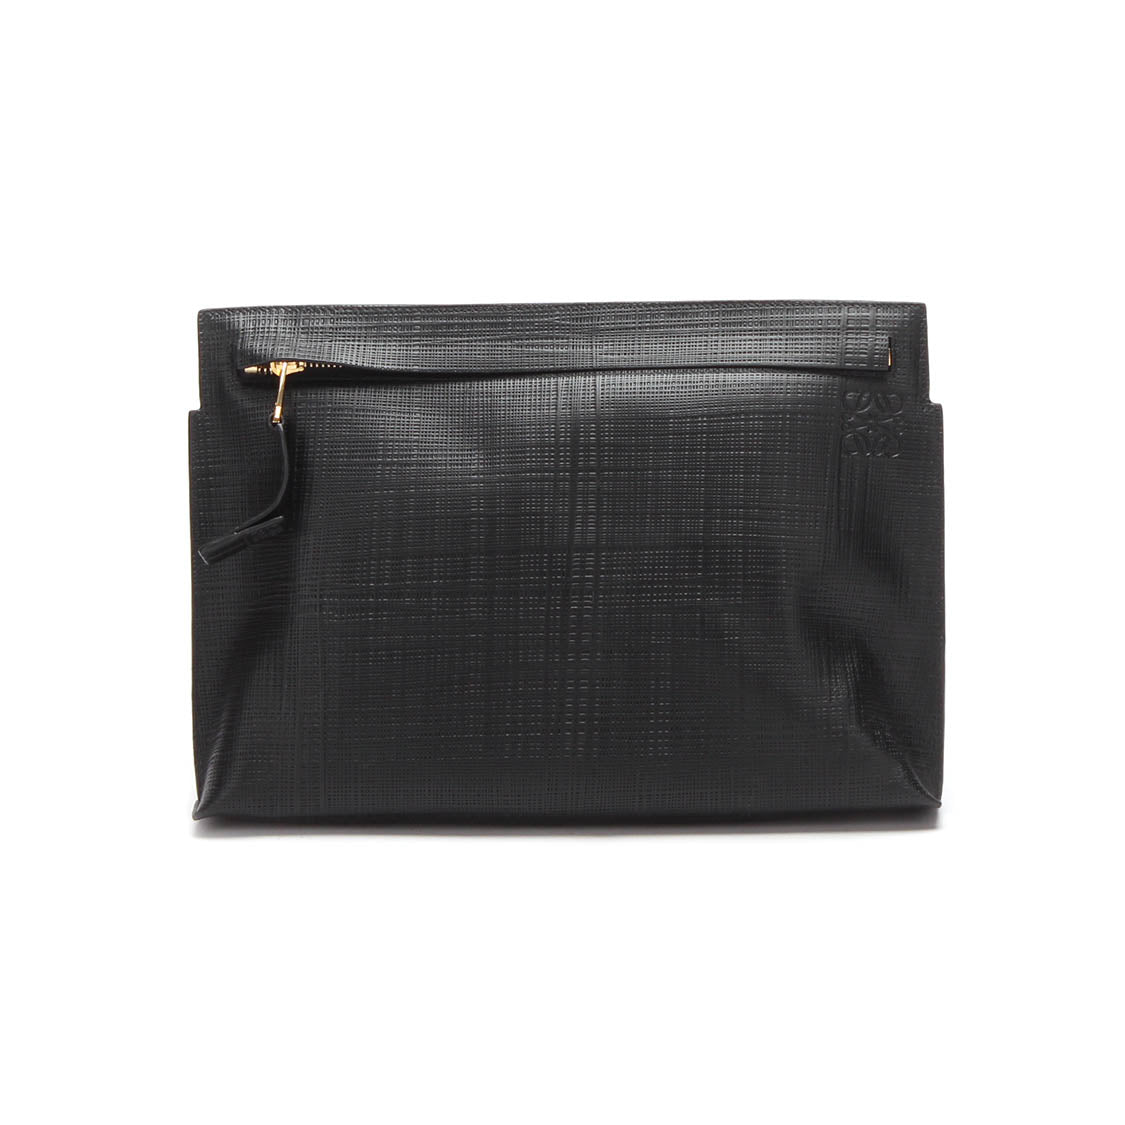 Textured Leather Clutch